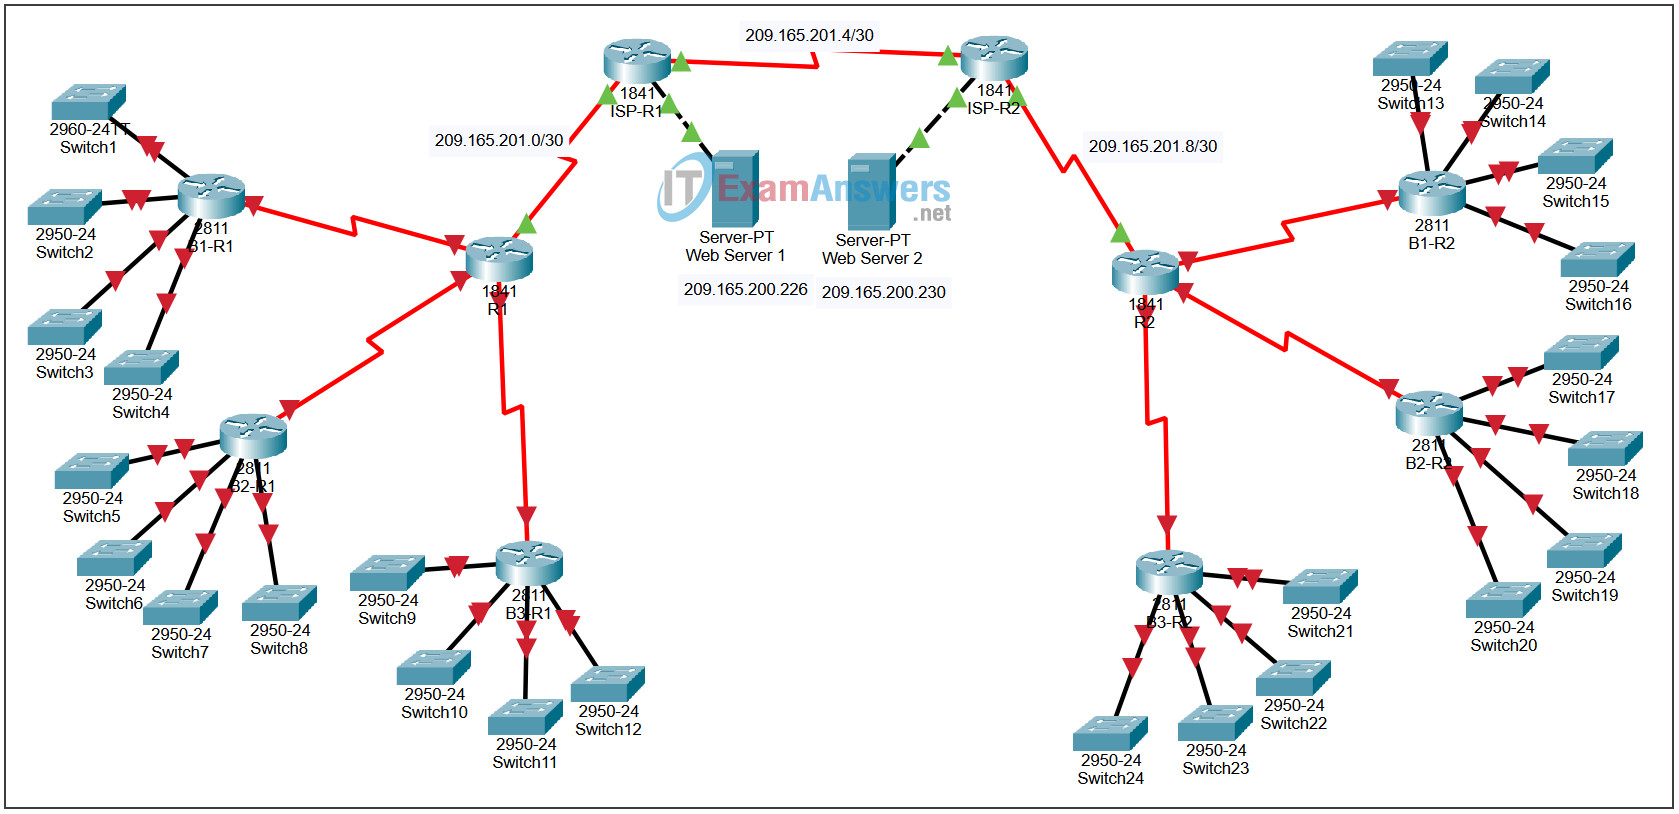 5.7.1 Packet Tracer - Skills Integration Challenge Answers 2